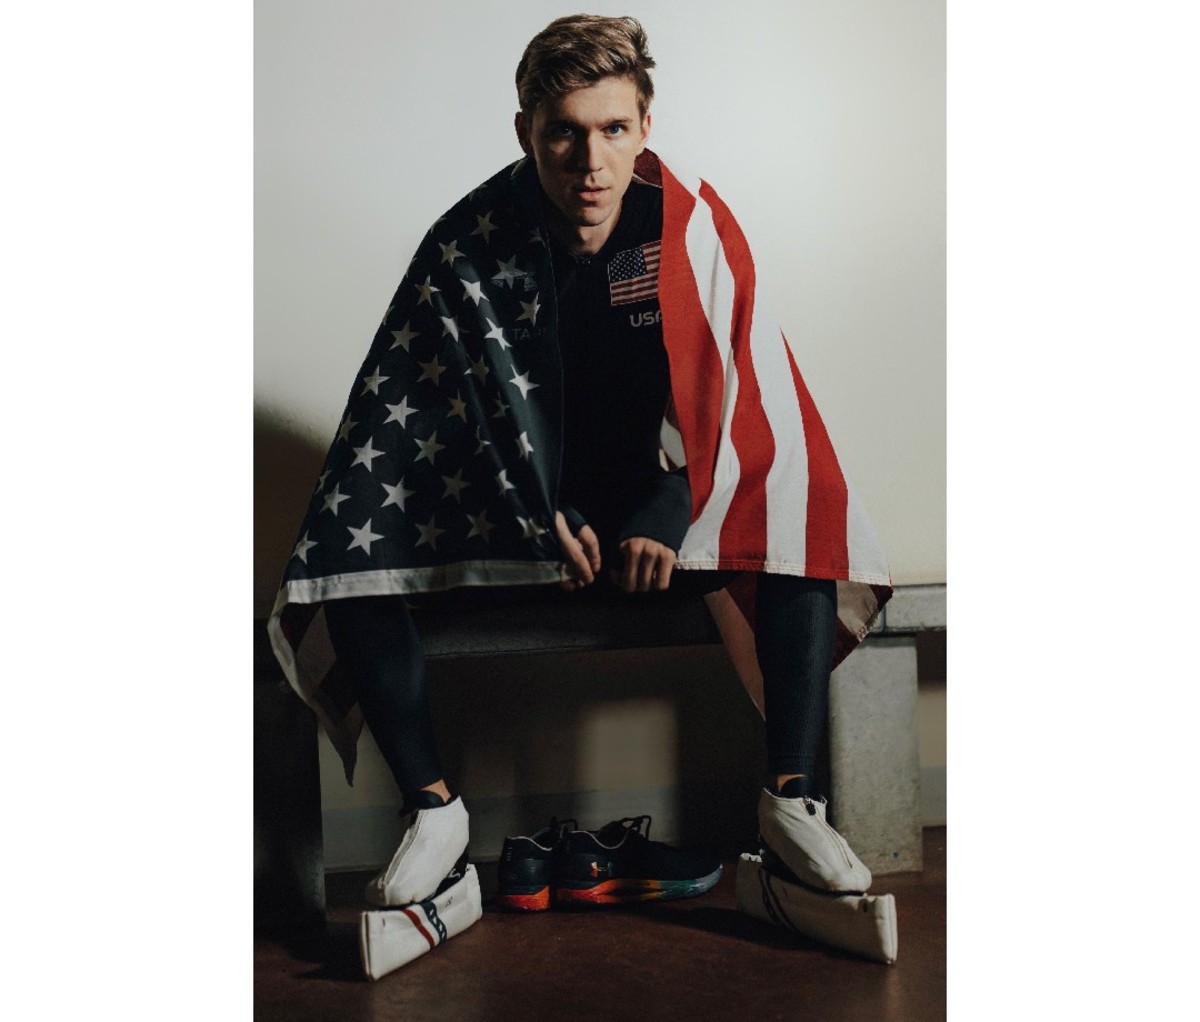 Team USA speed skater Conor McDermott-Mostowy draped in a US flag